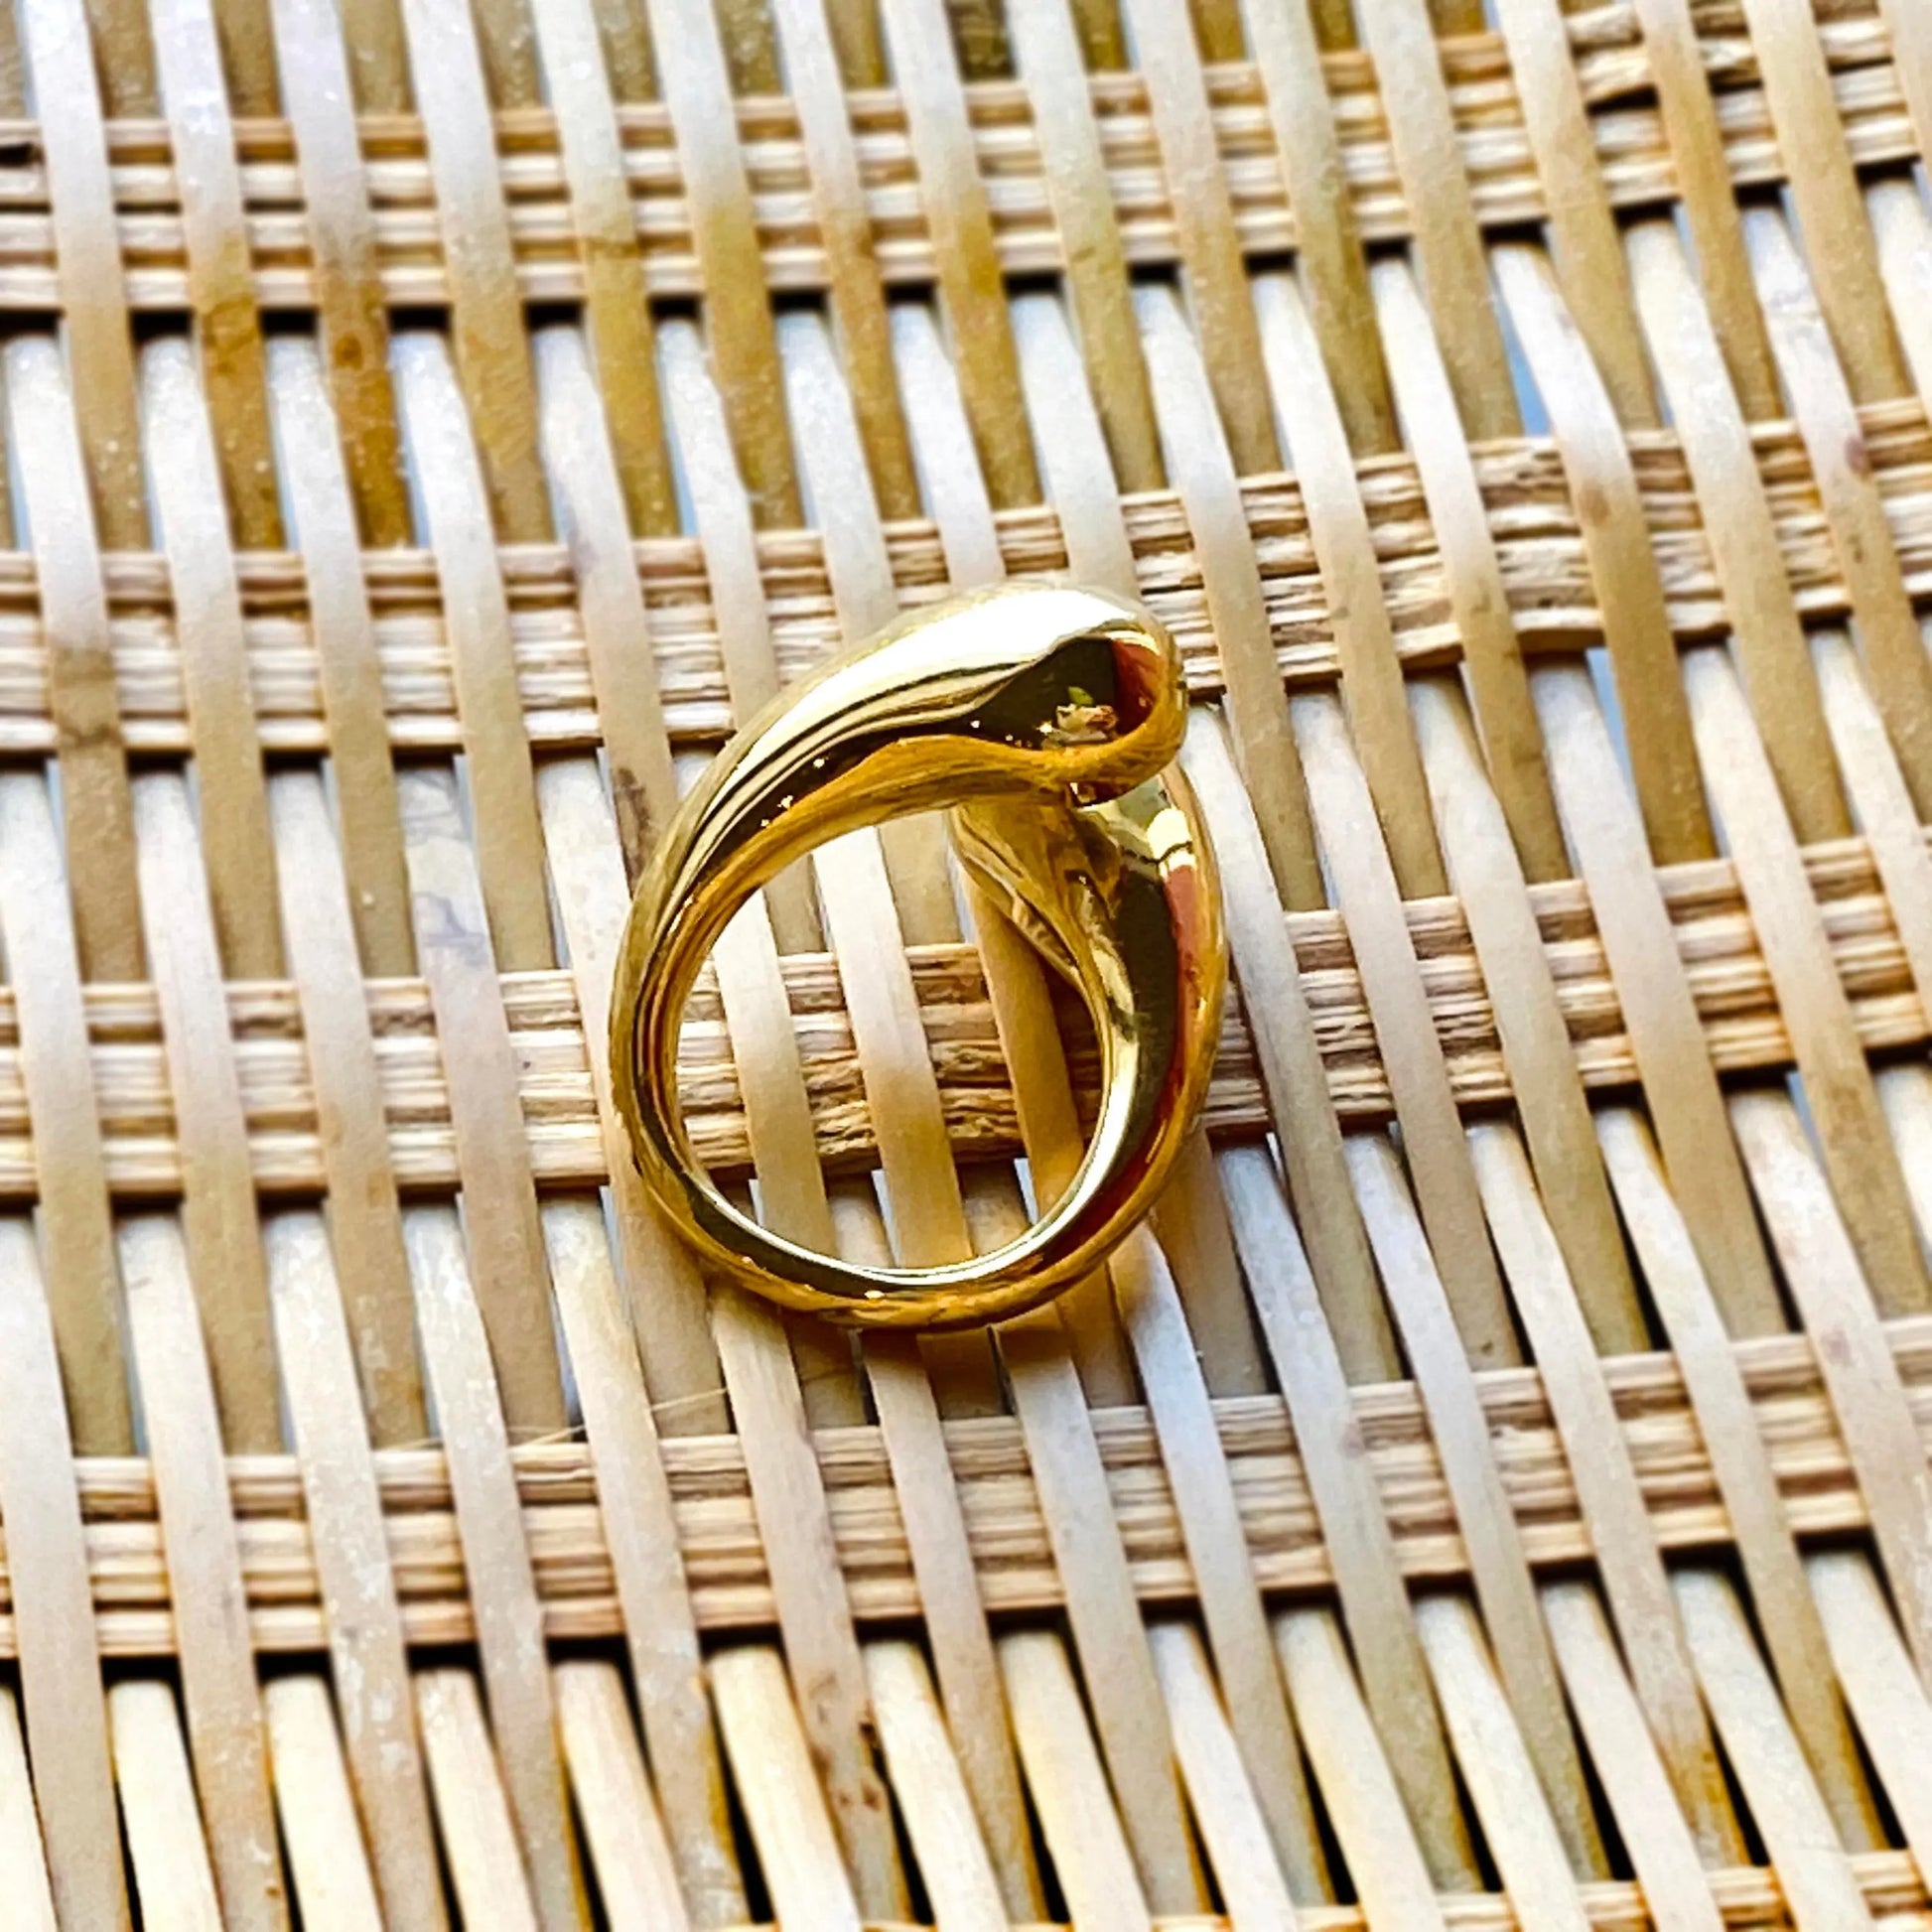 Ring | 'Twist it Up' Handcasted in Kenya - Fair Trade Jewelry Handcasted in Kenya